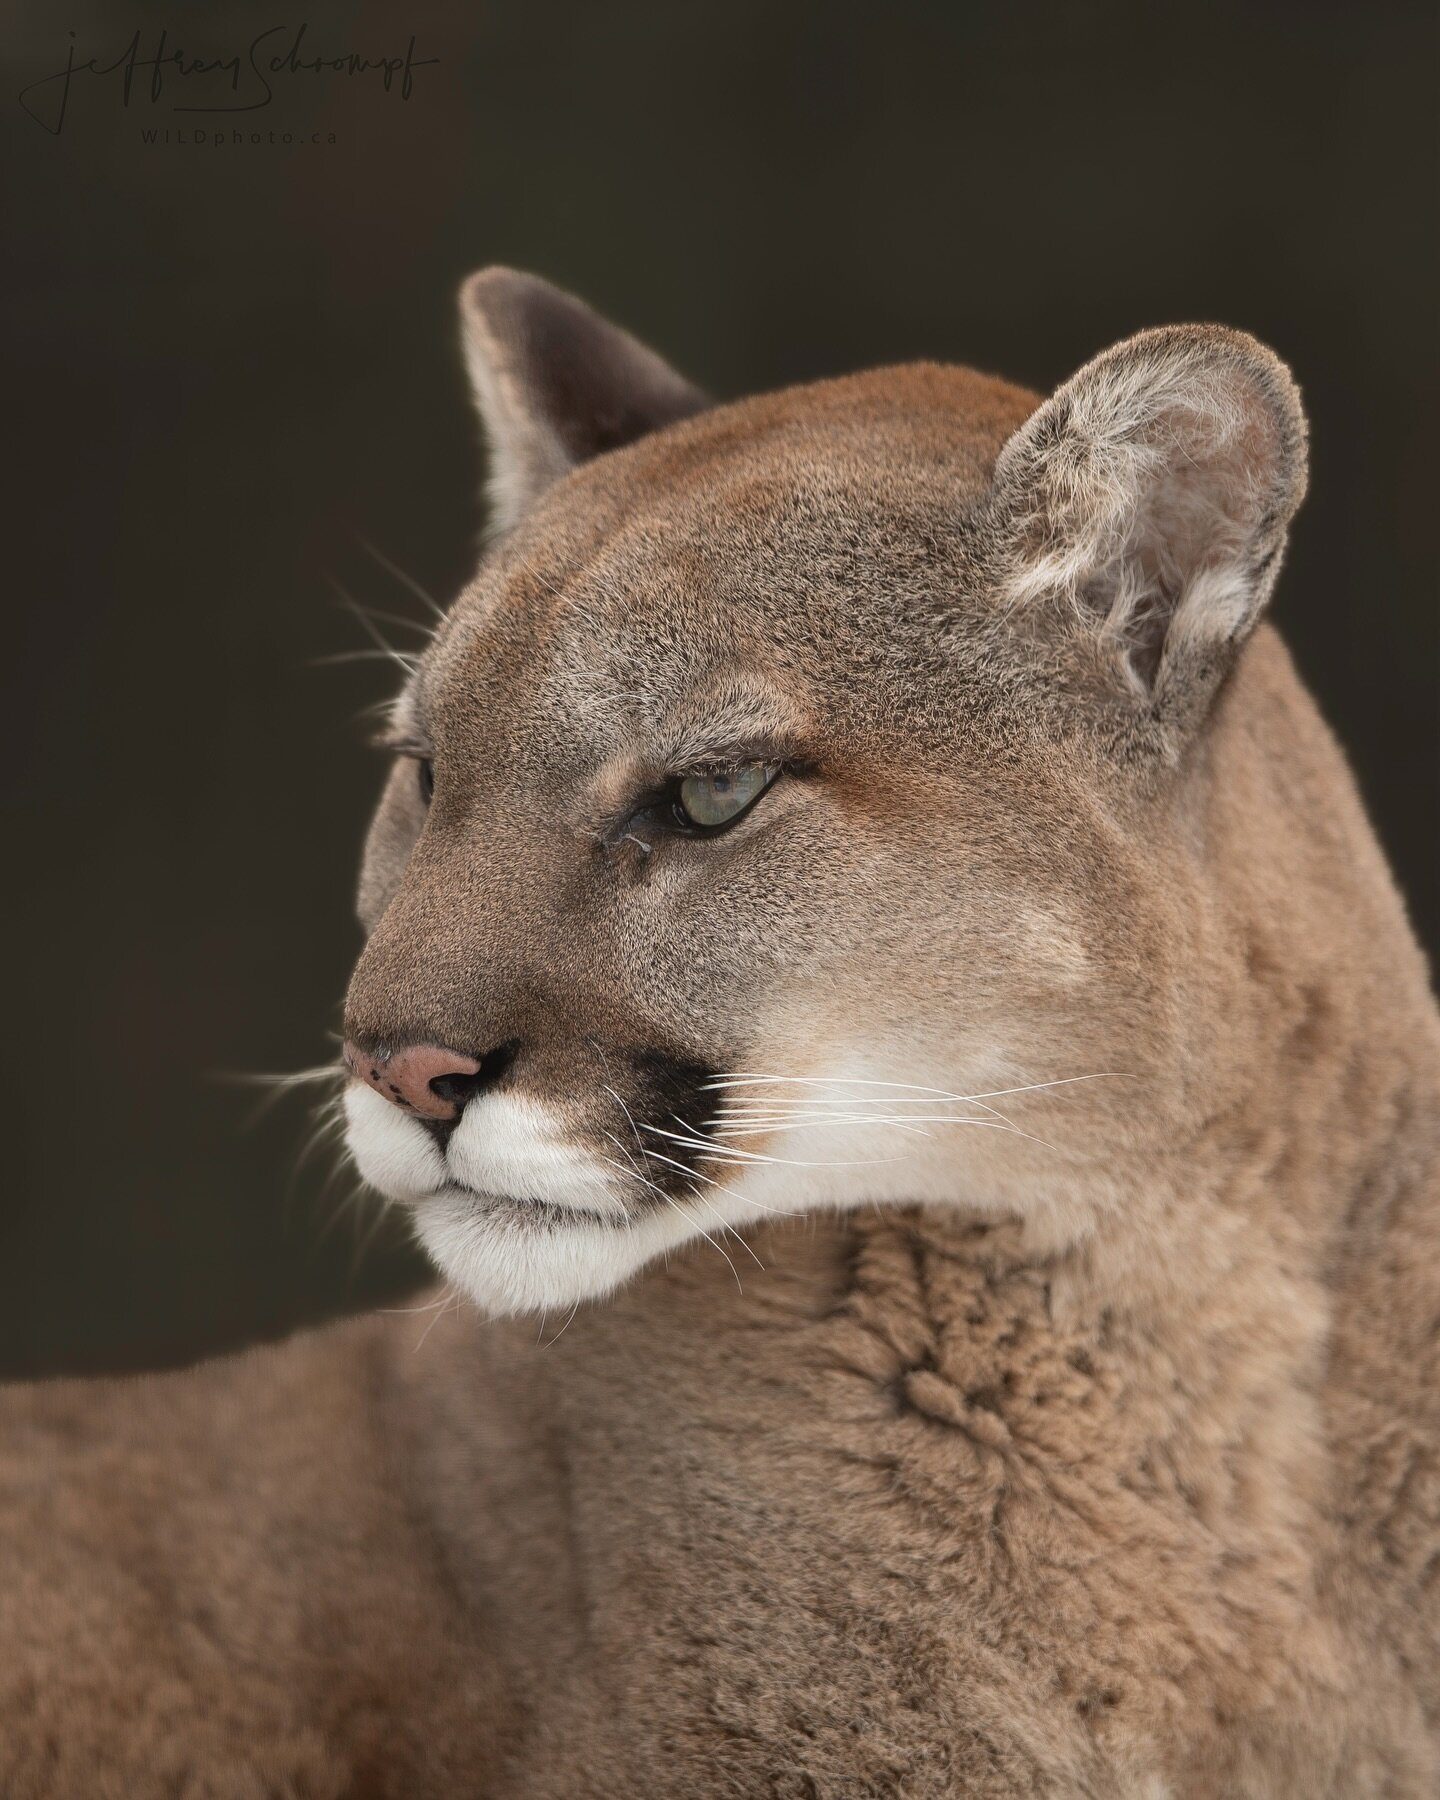 Mountain Lion
The cougar, also known as the puma, mountain lion, catamount, or panther, is a large cat native to the Americas
#mountainlion #puma #cougars